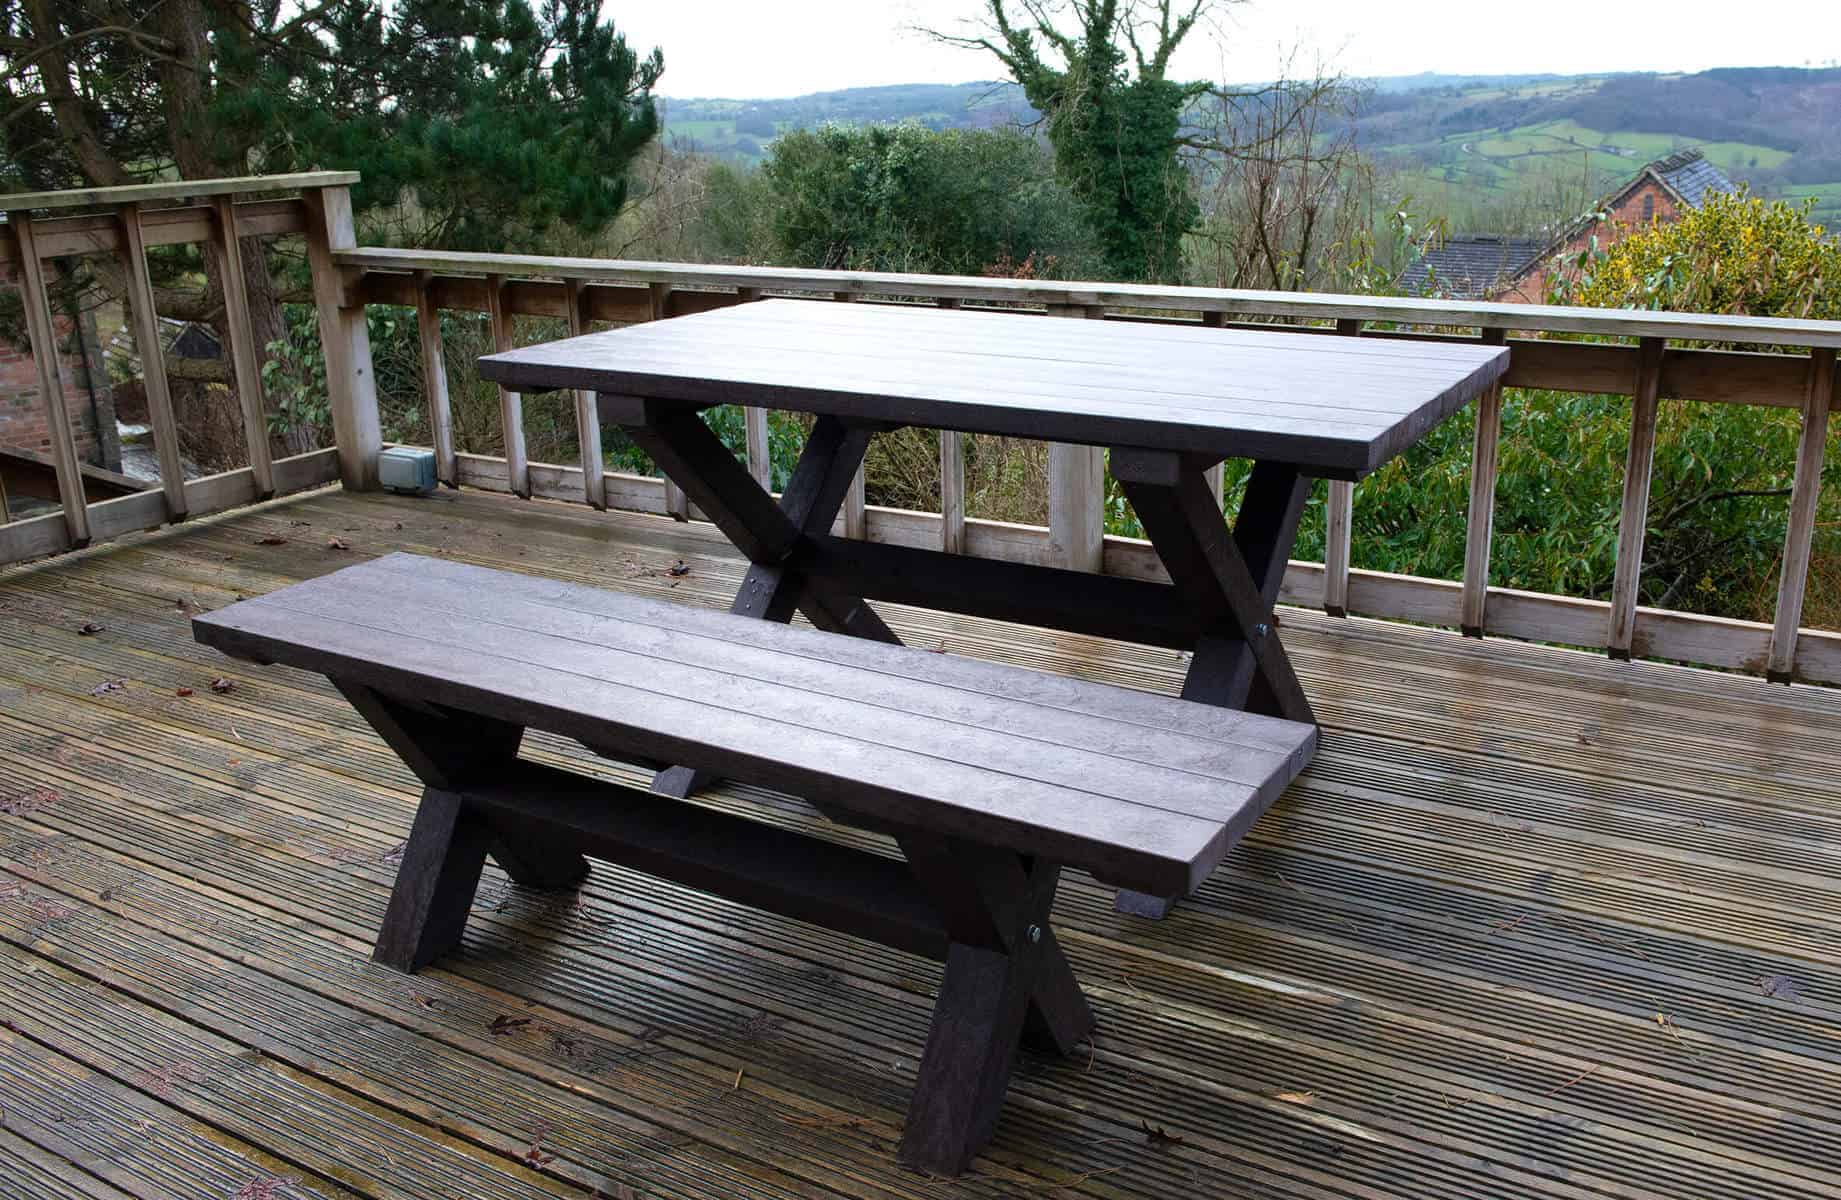 TDP Wheatcroft table with 1 Wheatcroft bench in Brown made out of recycled plastic waste